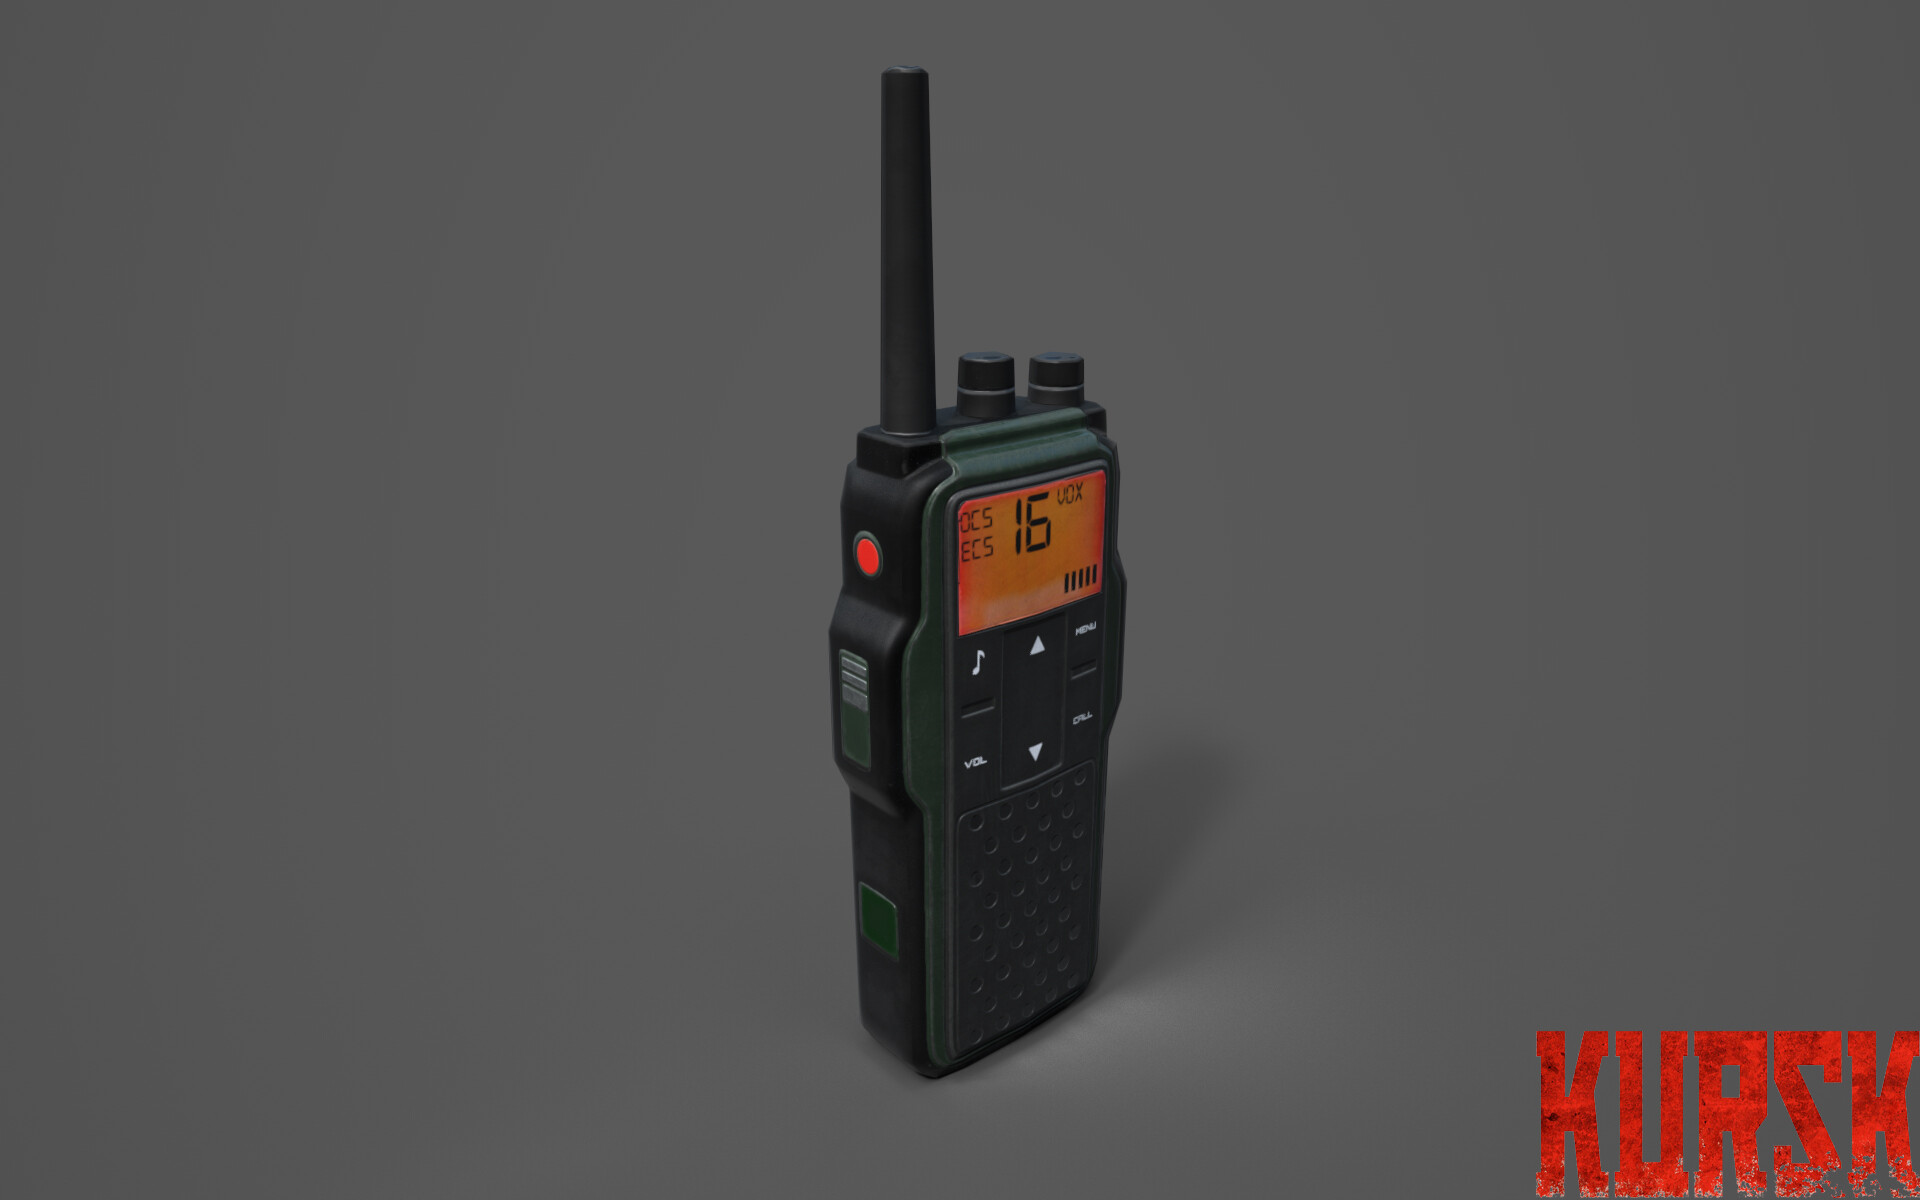 Marine With Walkie Talkie Stock Photo - Download Image Now